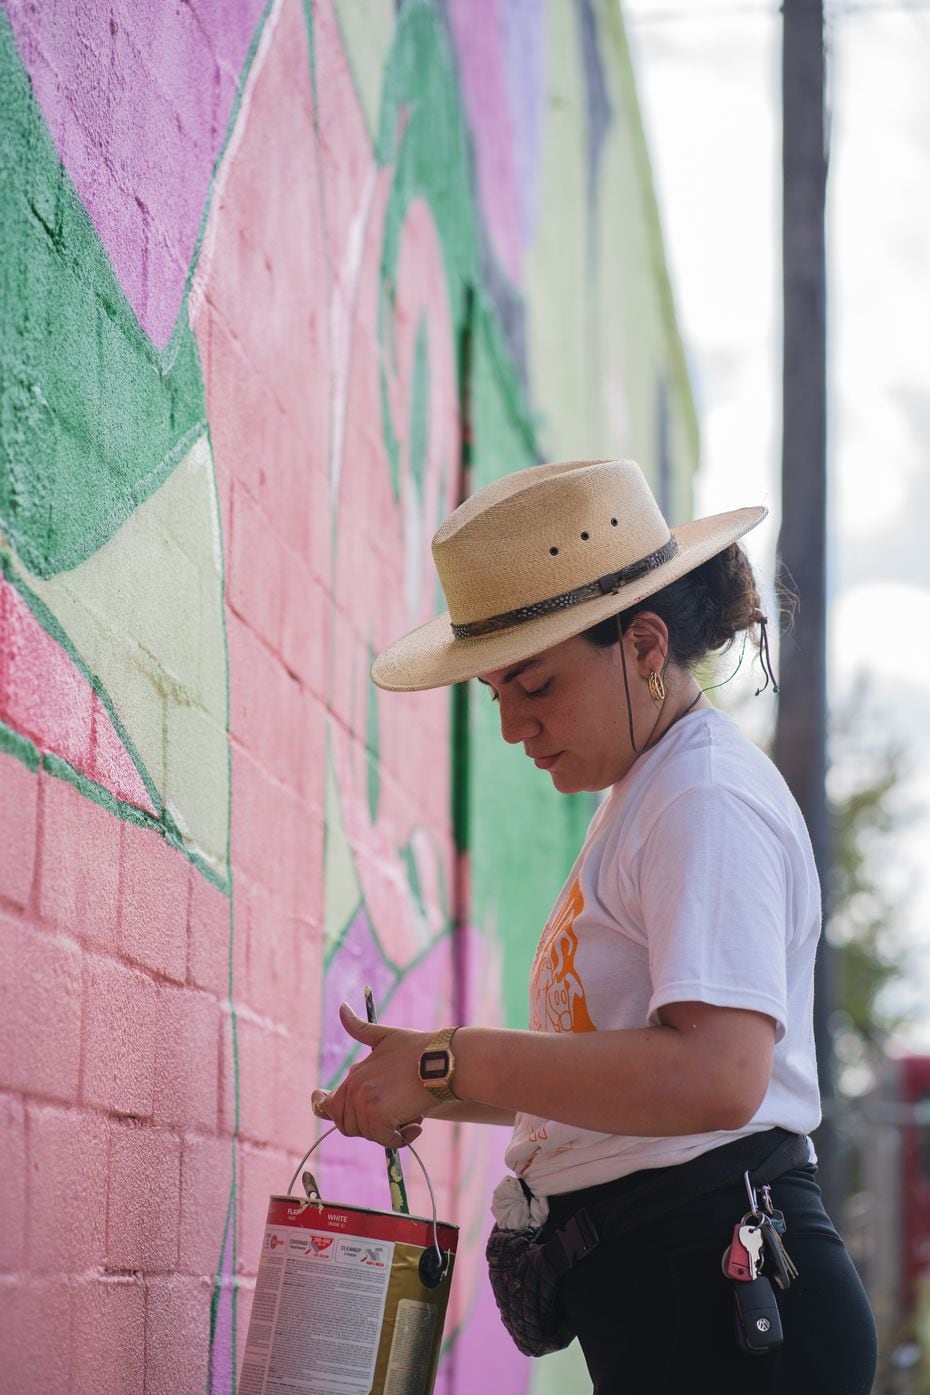 Artist Stephanie Sanz paints a mural of two women embracing for the Wild West Mural Fest. (Photo by Jeremy Biggers, courtesy of Wild West Mural Fest)